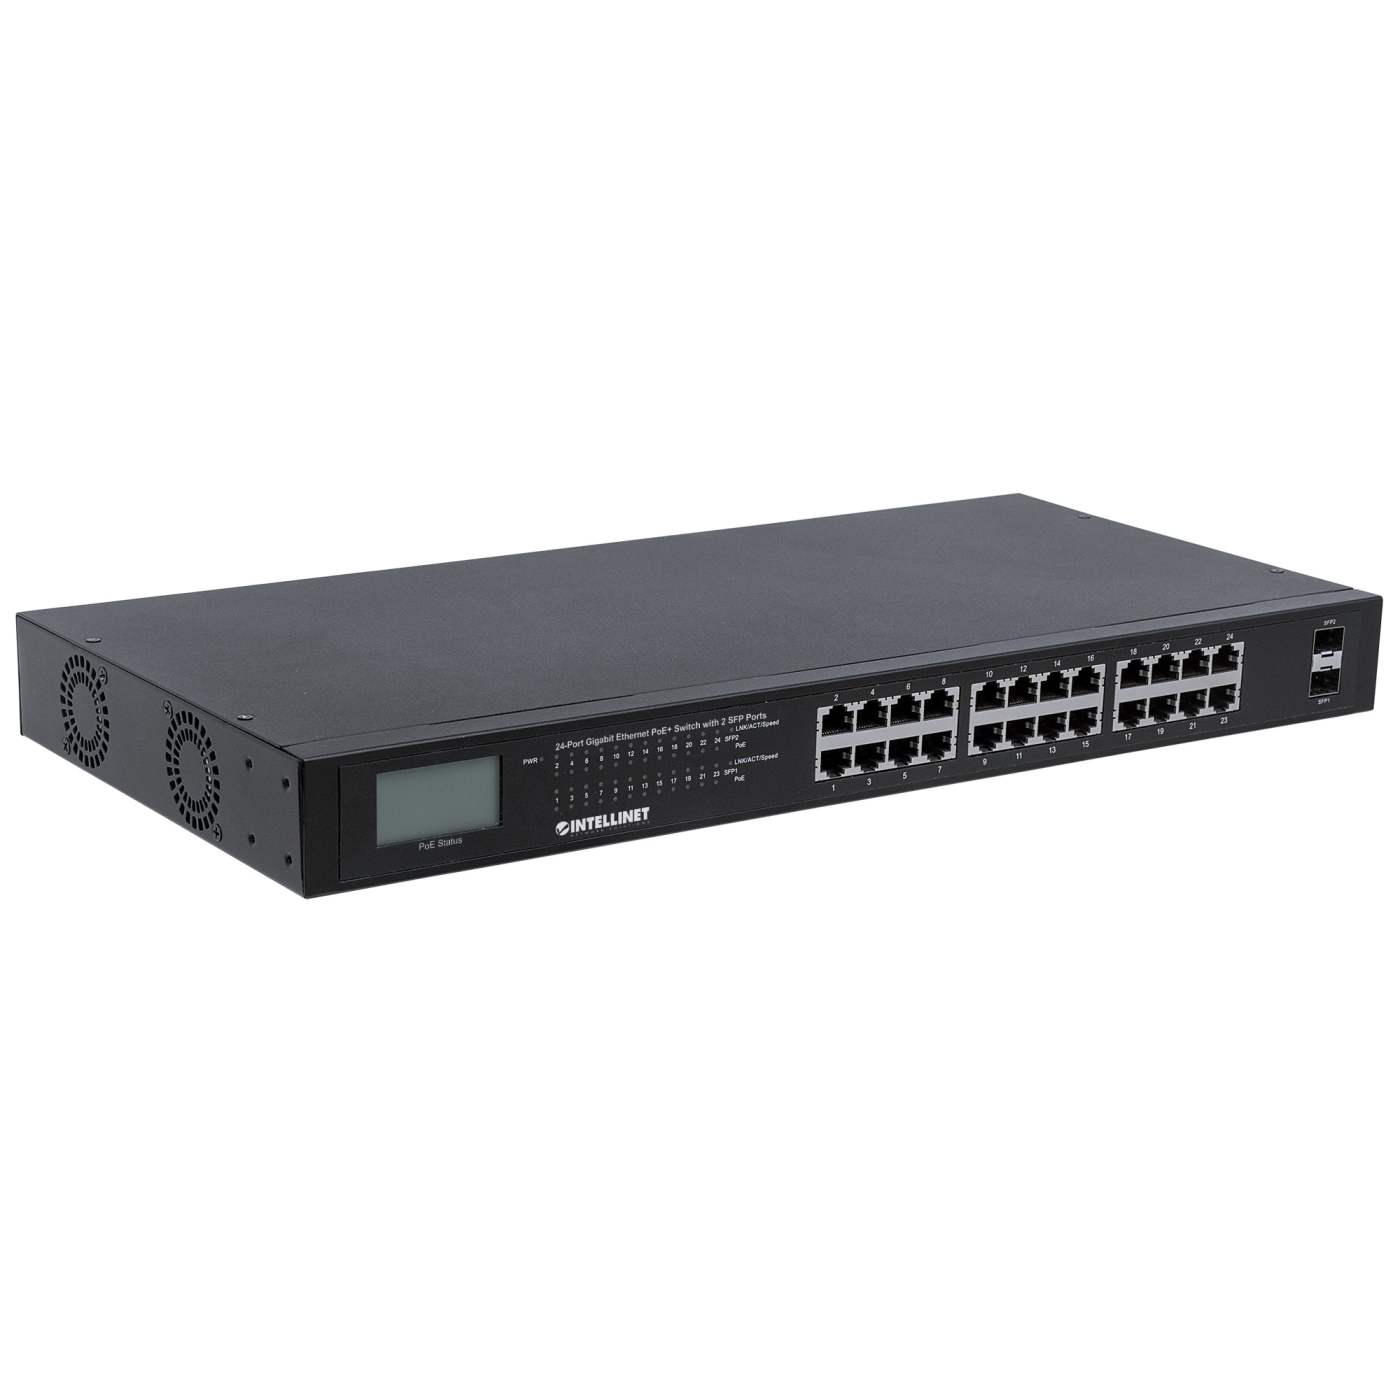 24-Port Gigabit Ethernet PoE+ Switch with 2 SFP Ports and LCD Screen Image 3